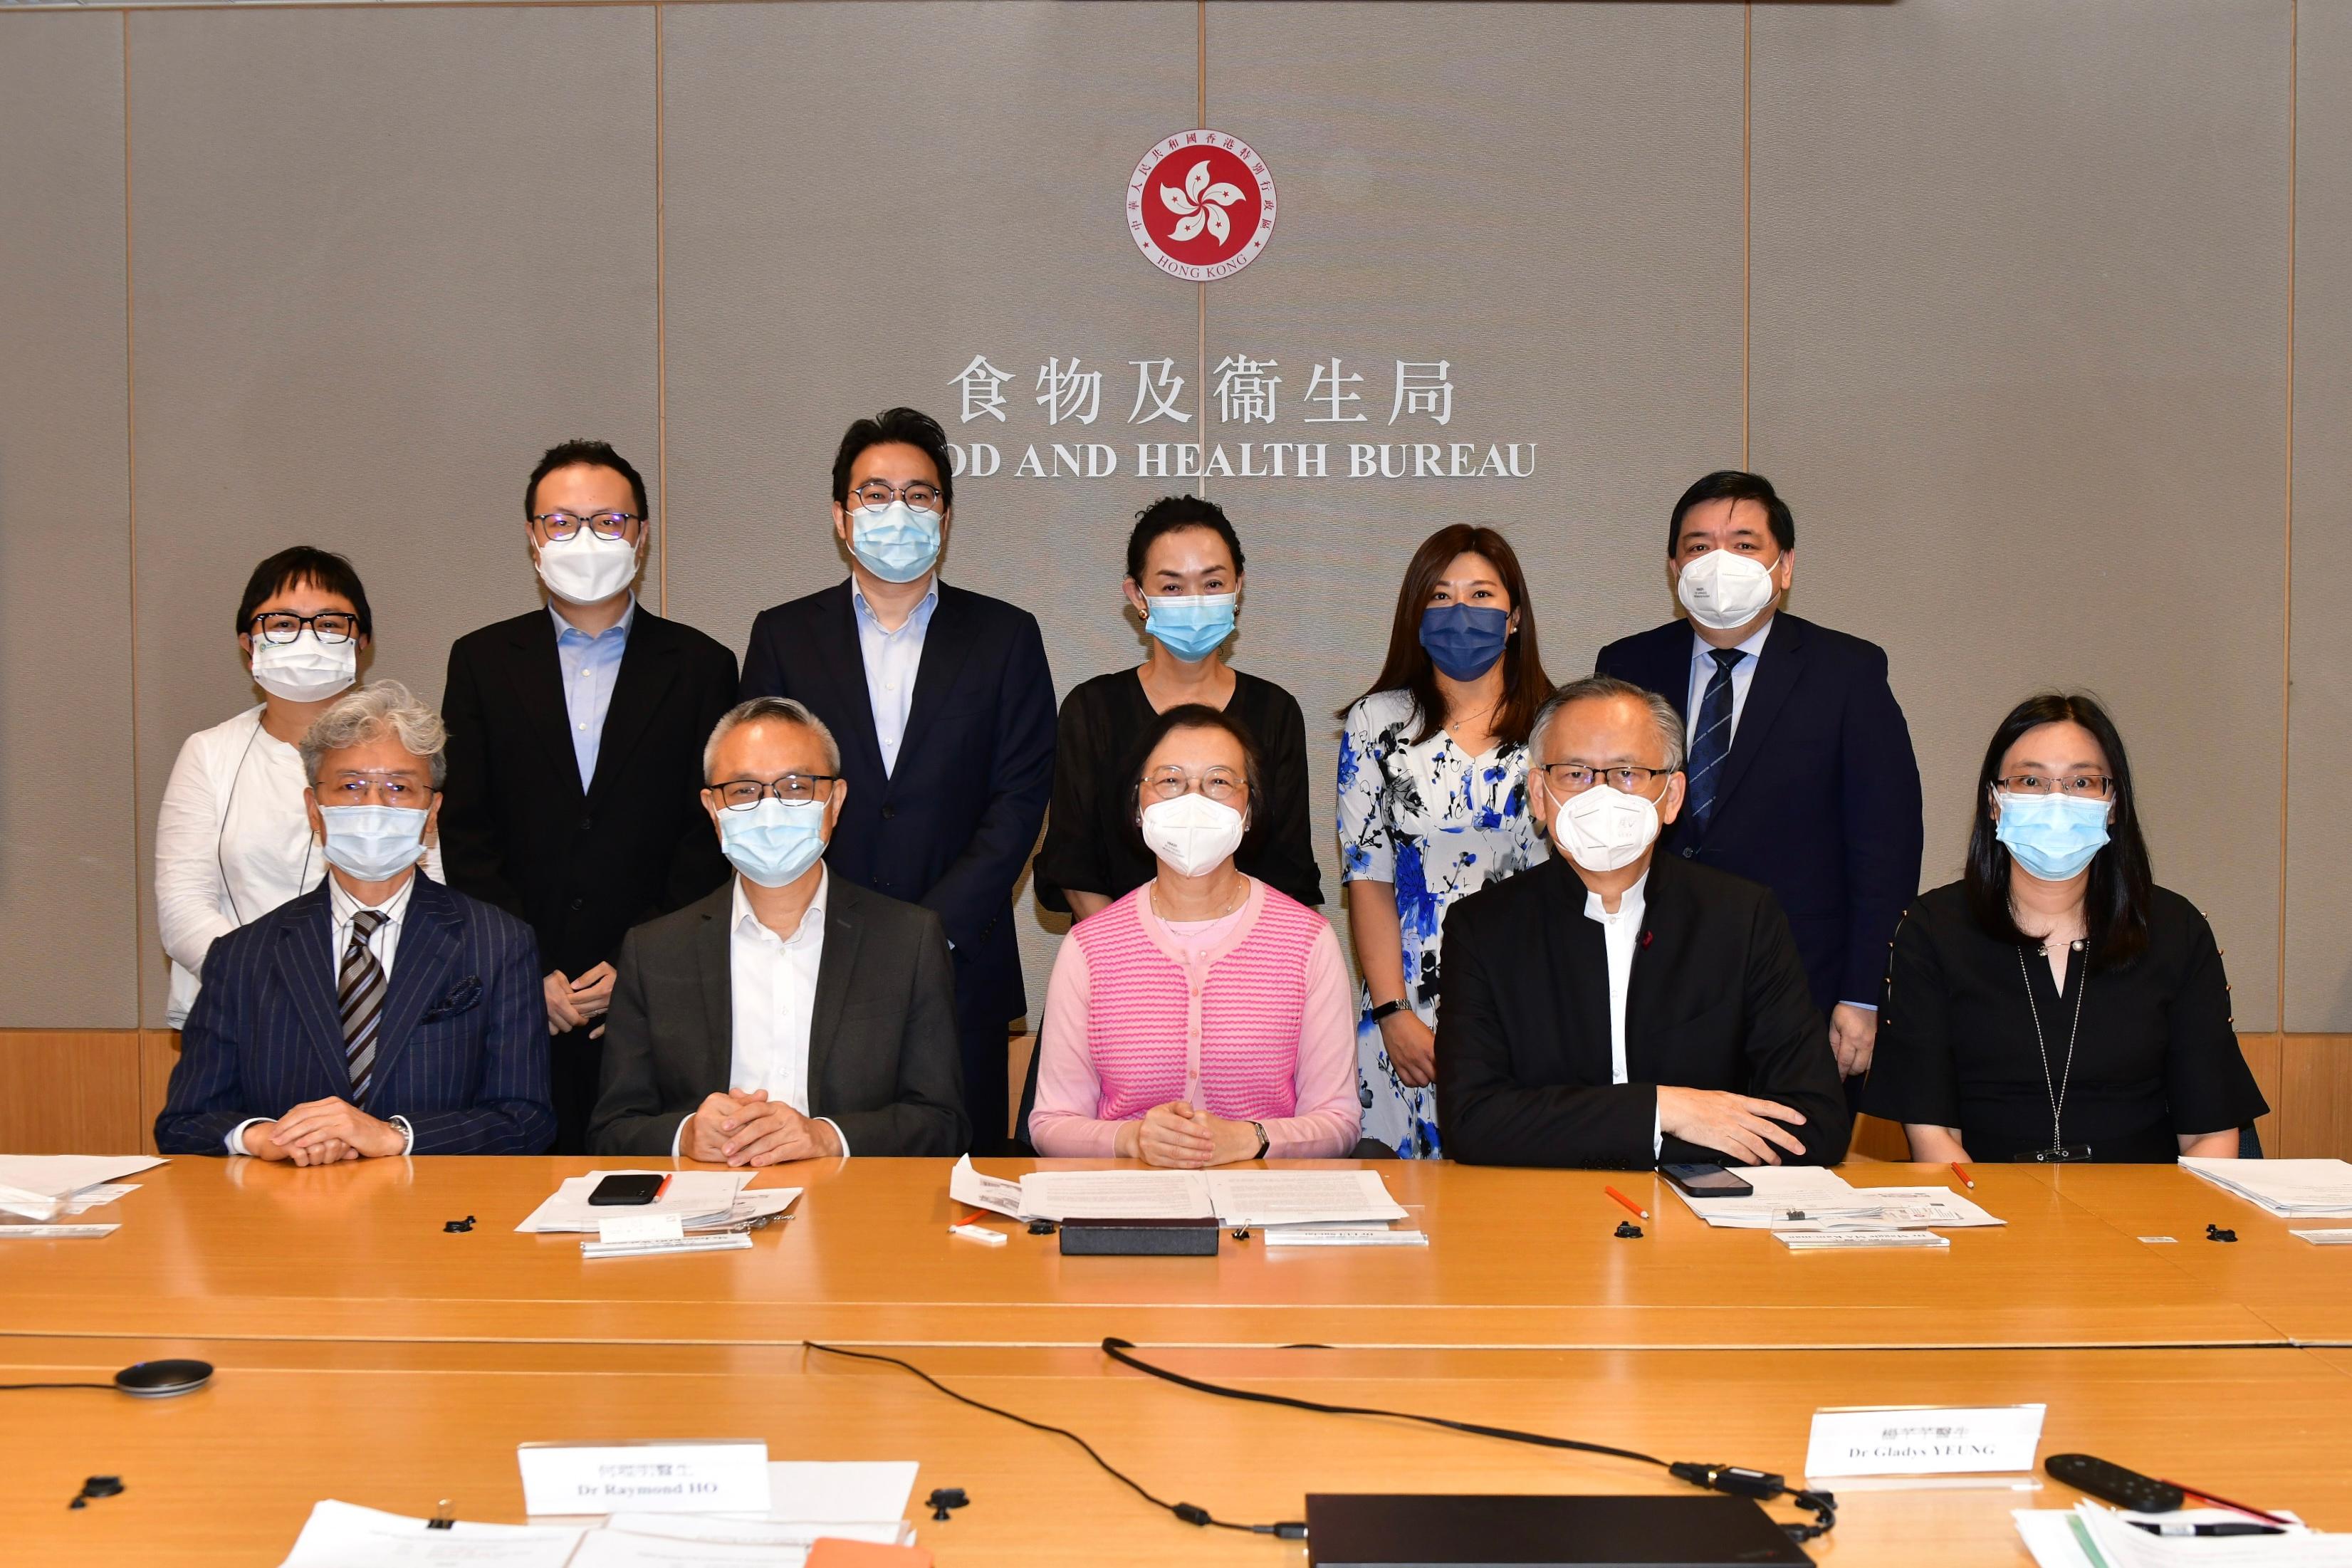 The Committee on Promotion of Organ Donation held its eighth meeting today (June 23). The Secretary for Food and Health, Professor Sophia Chan, expressed her gratitude to members of the committee before the meeting for their efforts in promoting organ donation. Photo shows Professor Chan (front row, centre); the Chairperson of the Committee and Under Secretary for Food and Health, Dr Chui Tak-yi (front row, second left); and other members.